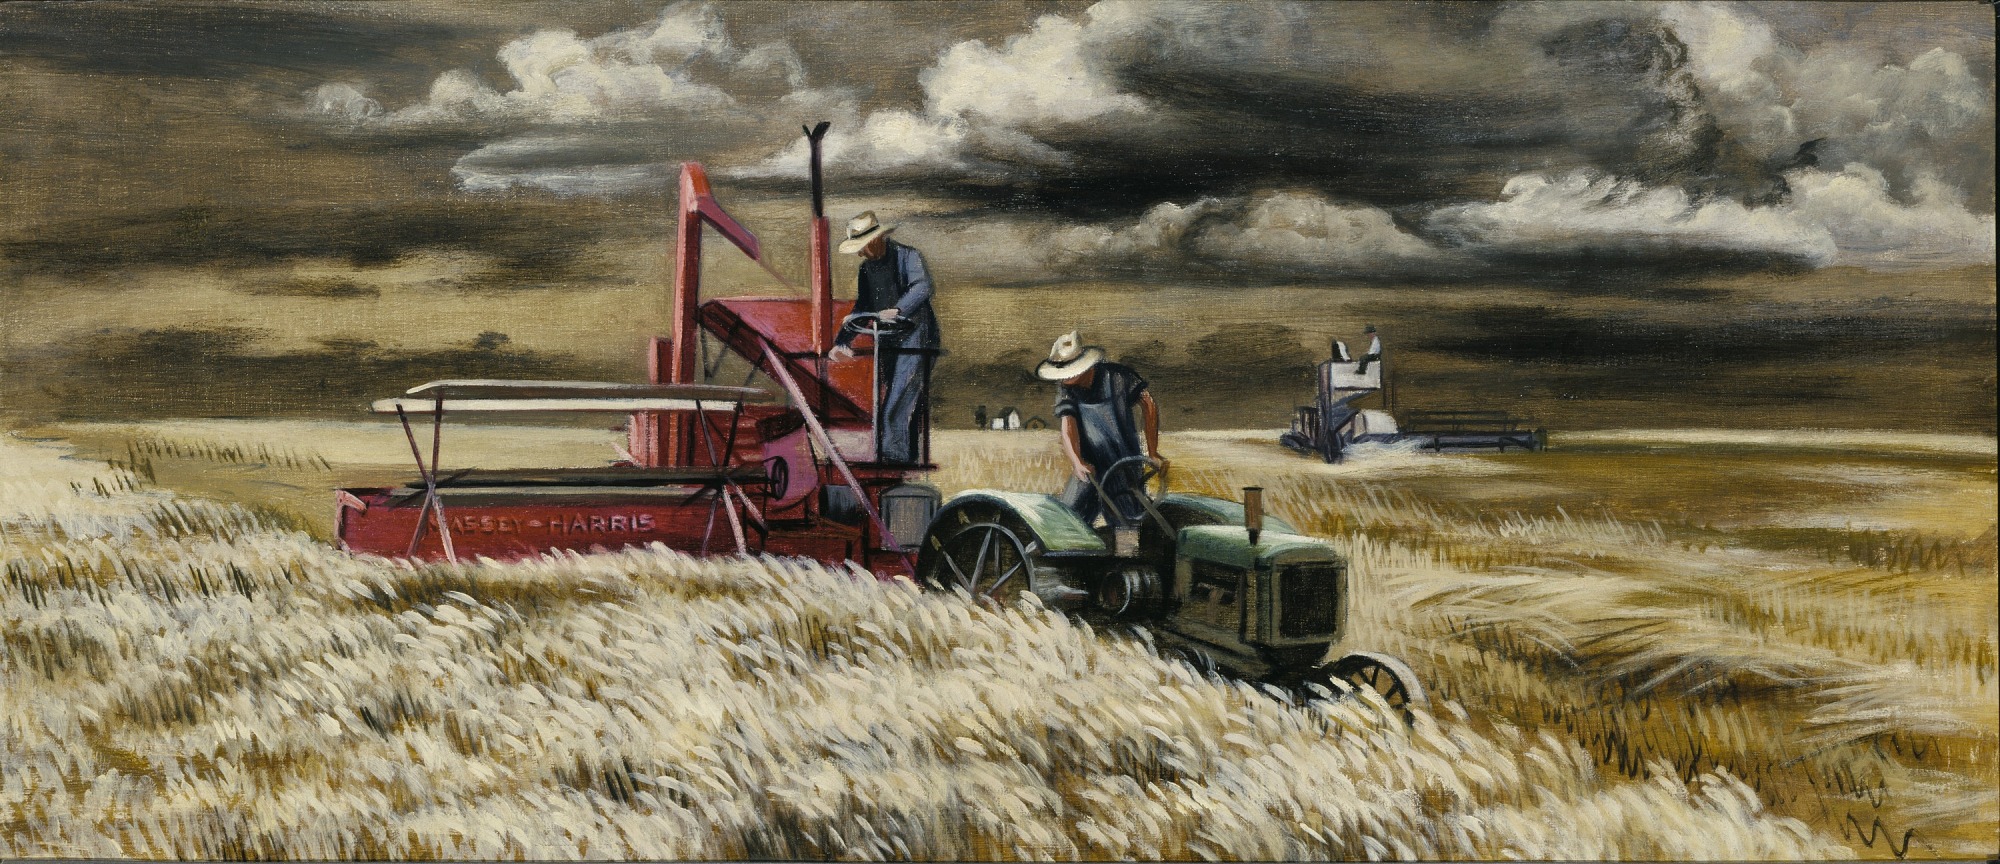 Oil painting of two men working a wheat field in a red thresher and a green tractor, with a farmhouse set against a cloudy sky in the background.